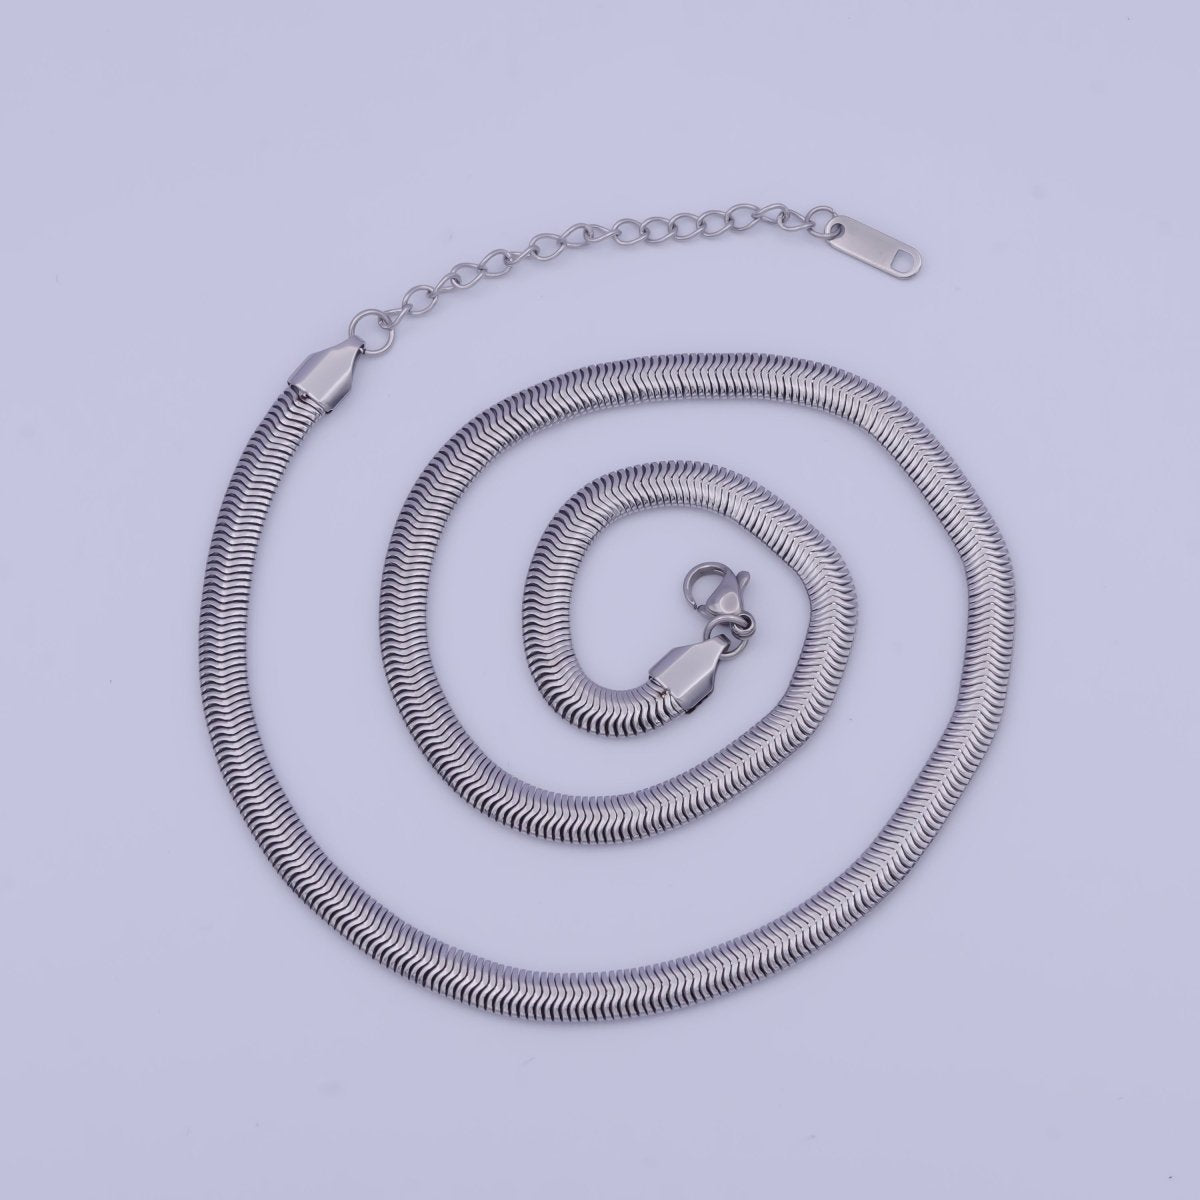 Snake Chain Necklace 16 18 20 Inch + 2.5" extender Length in 24k Gold Filled Chain | WA-1134 to WA-1139 Clearance Pricing - DLUXCA